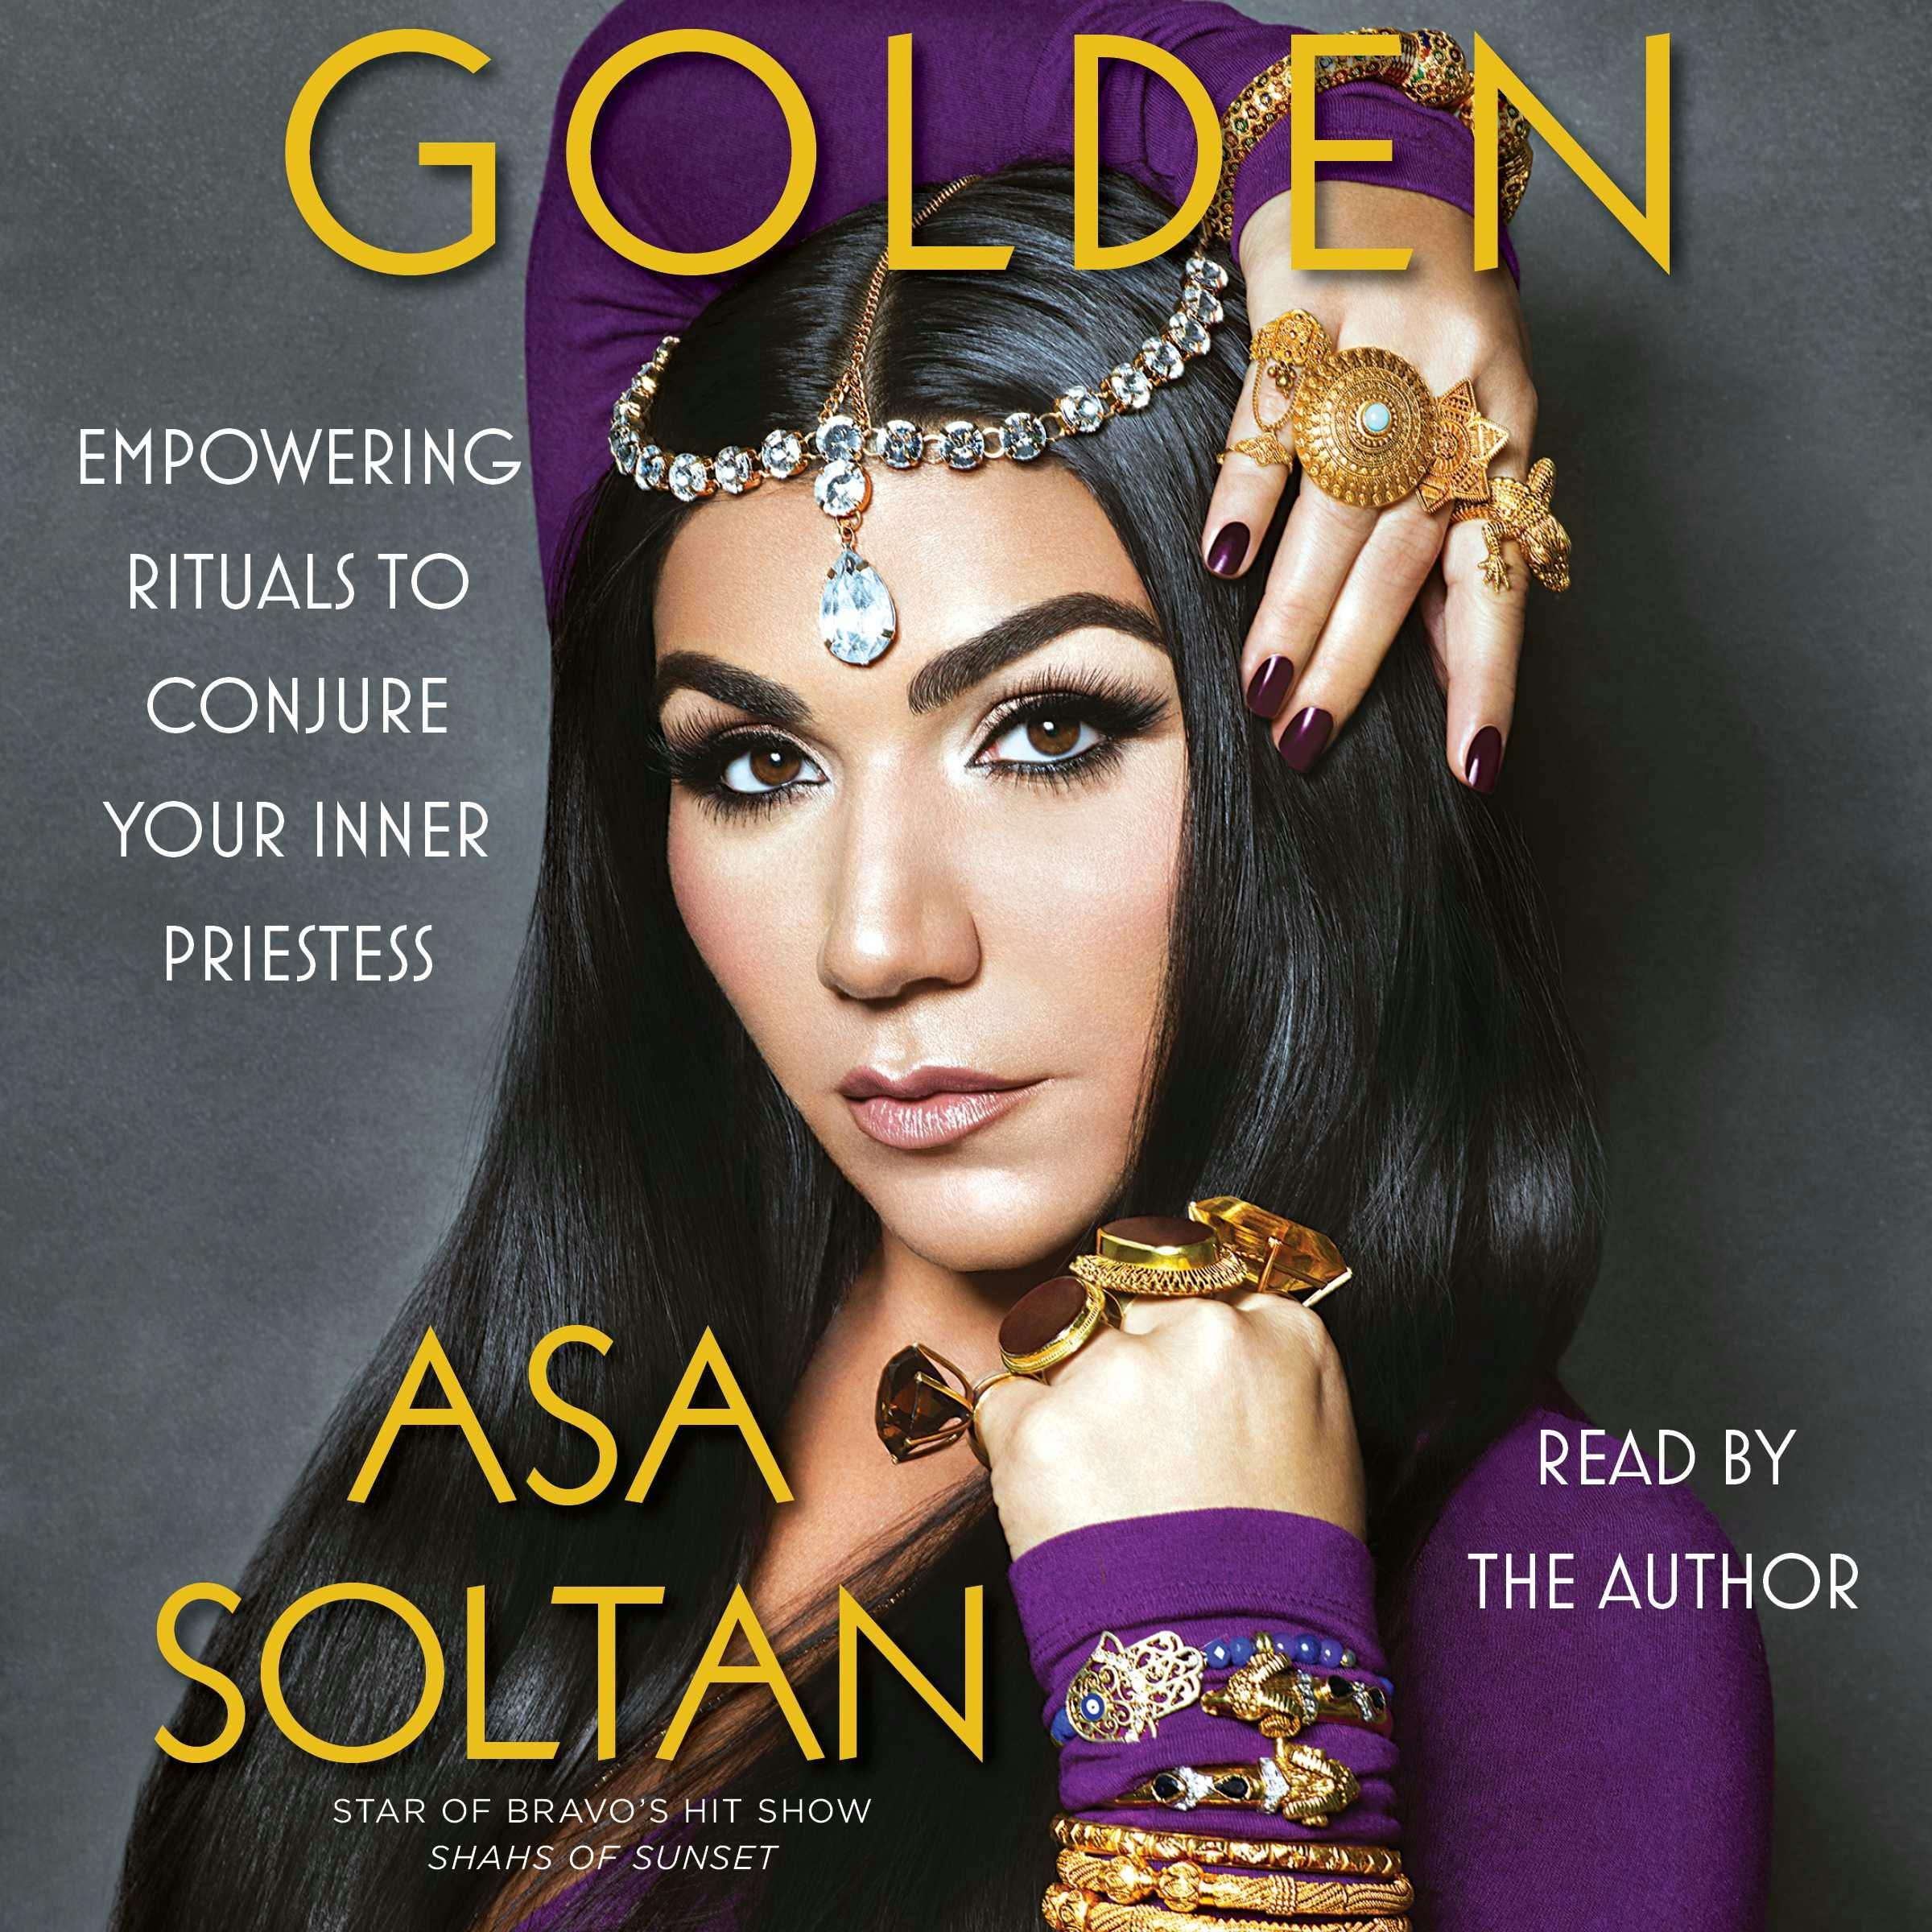 Golden: Empowering Rituals to Conjure Your Inner Priestess - Asa Soltan